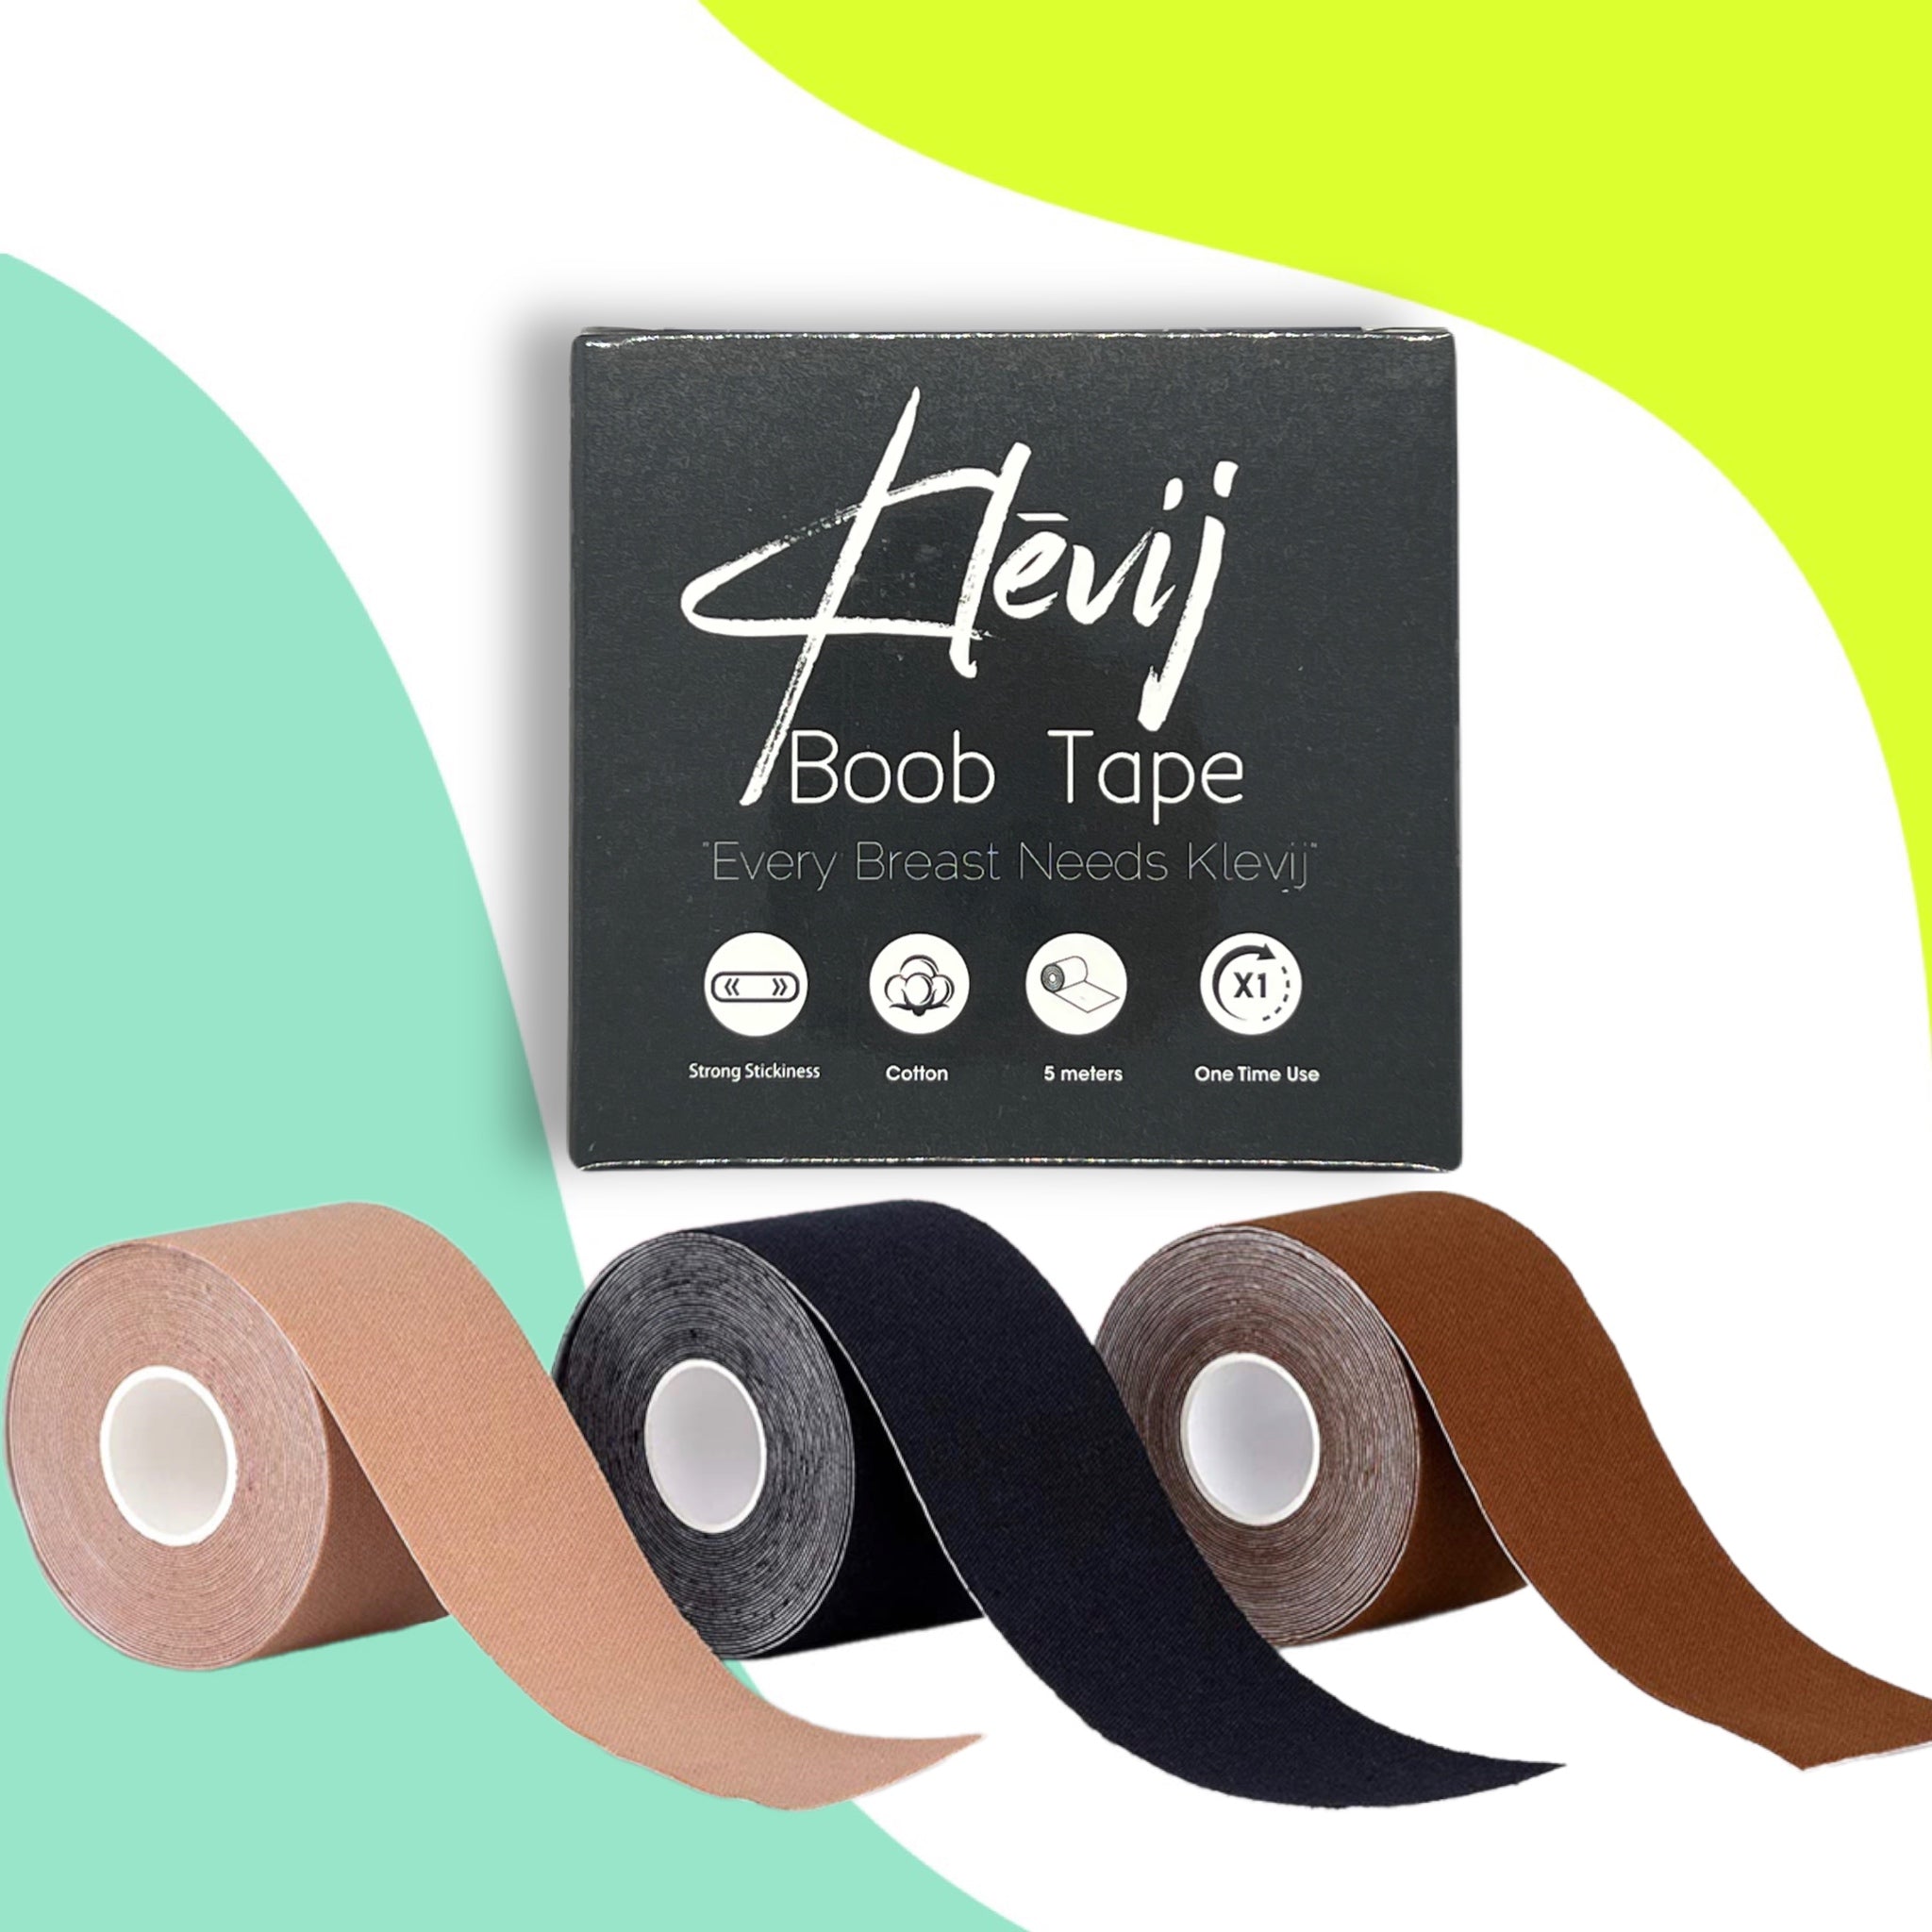 Get a Natural Lift - Boob Tape and Silicone Nipple Covers – Klevij